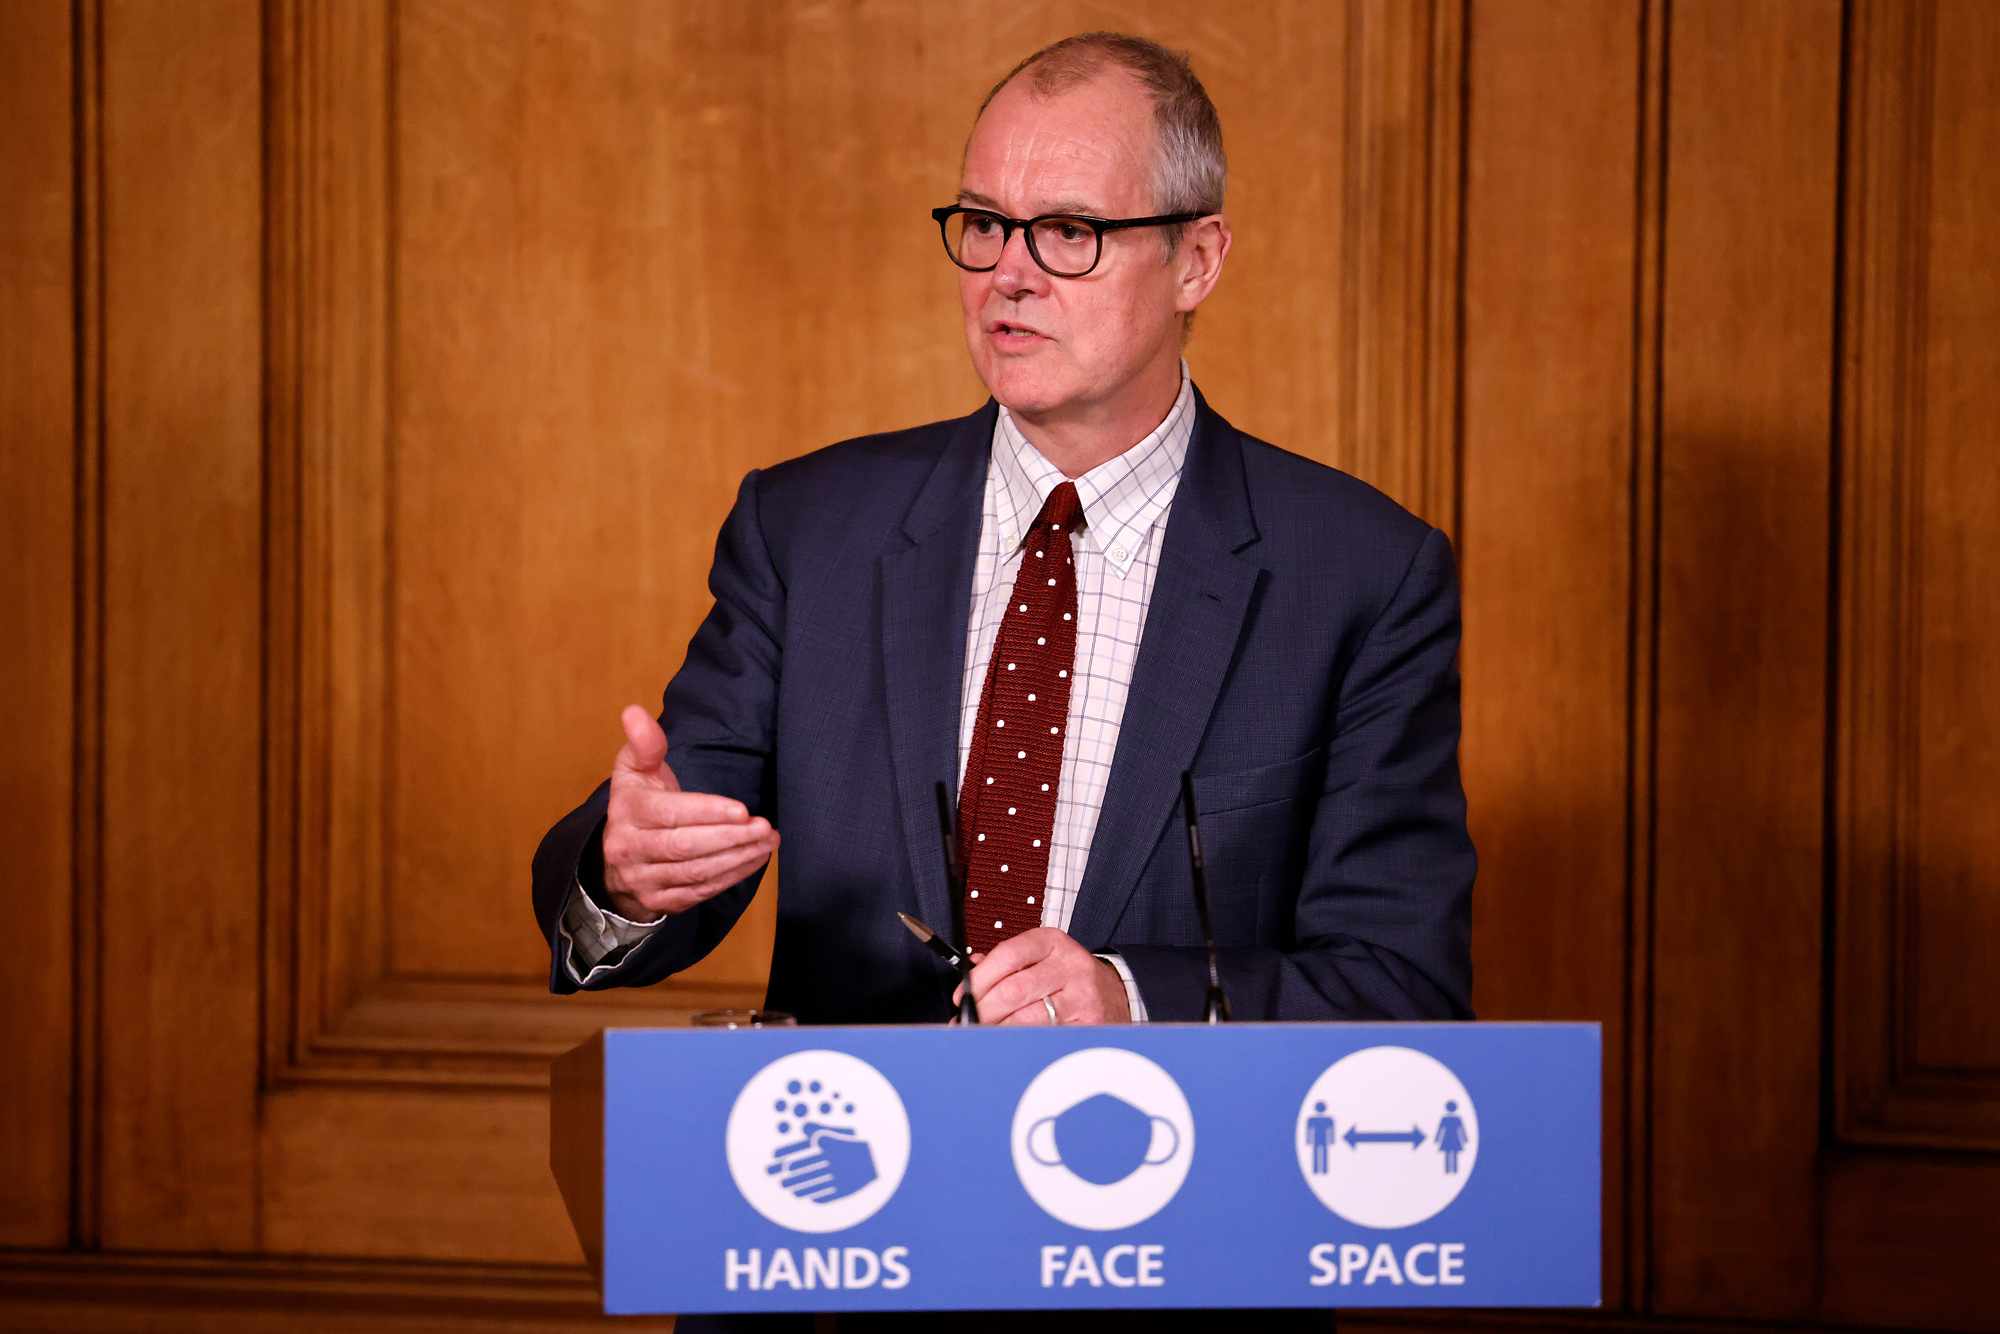 Britain's Chief Scientific Adviser, Patrick Vallance speaks during a virtual press conference inside 10 Downing Street on December 21 in London.